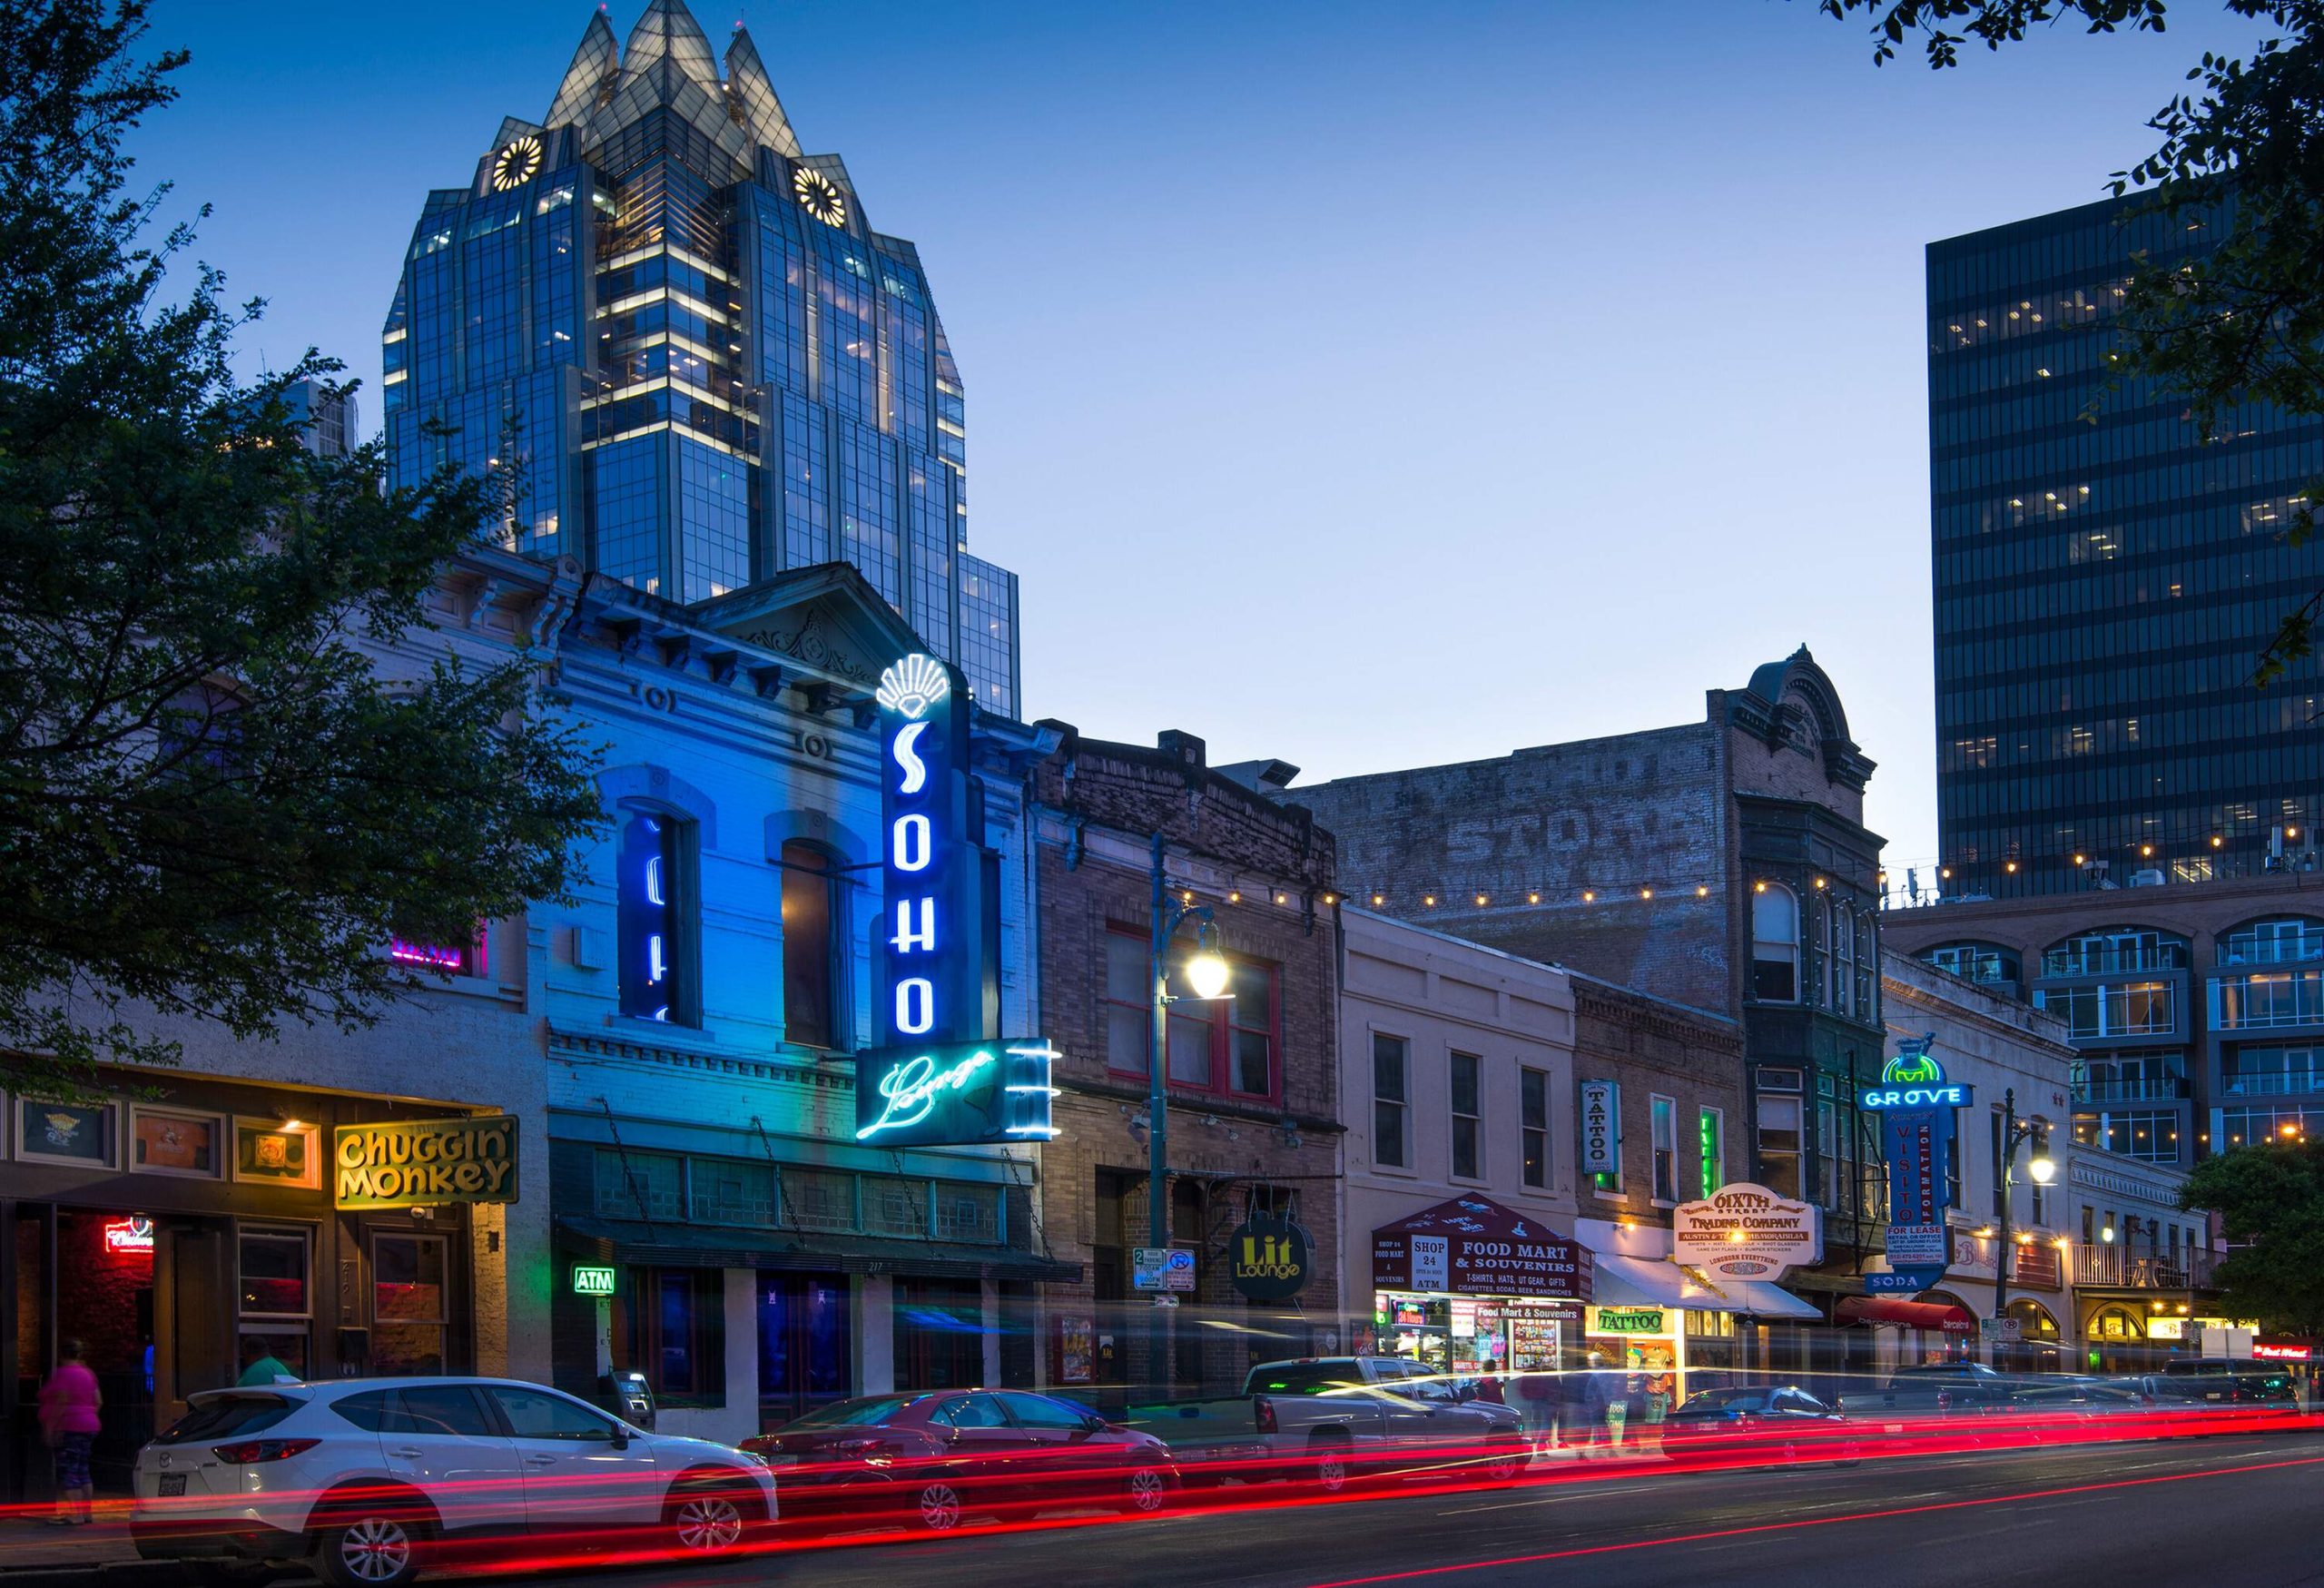 Sixth Street is a historic street and entertainmnet district in downtown Austin, Texas. Sixth Street was formerly named Pecan Street. It is listed on the National Register of Historic Places.